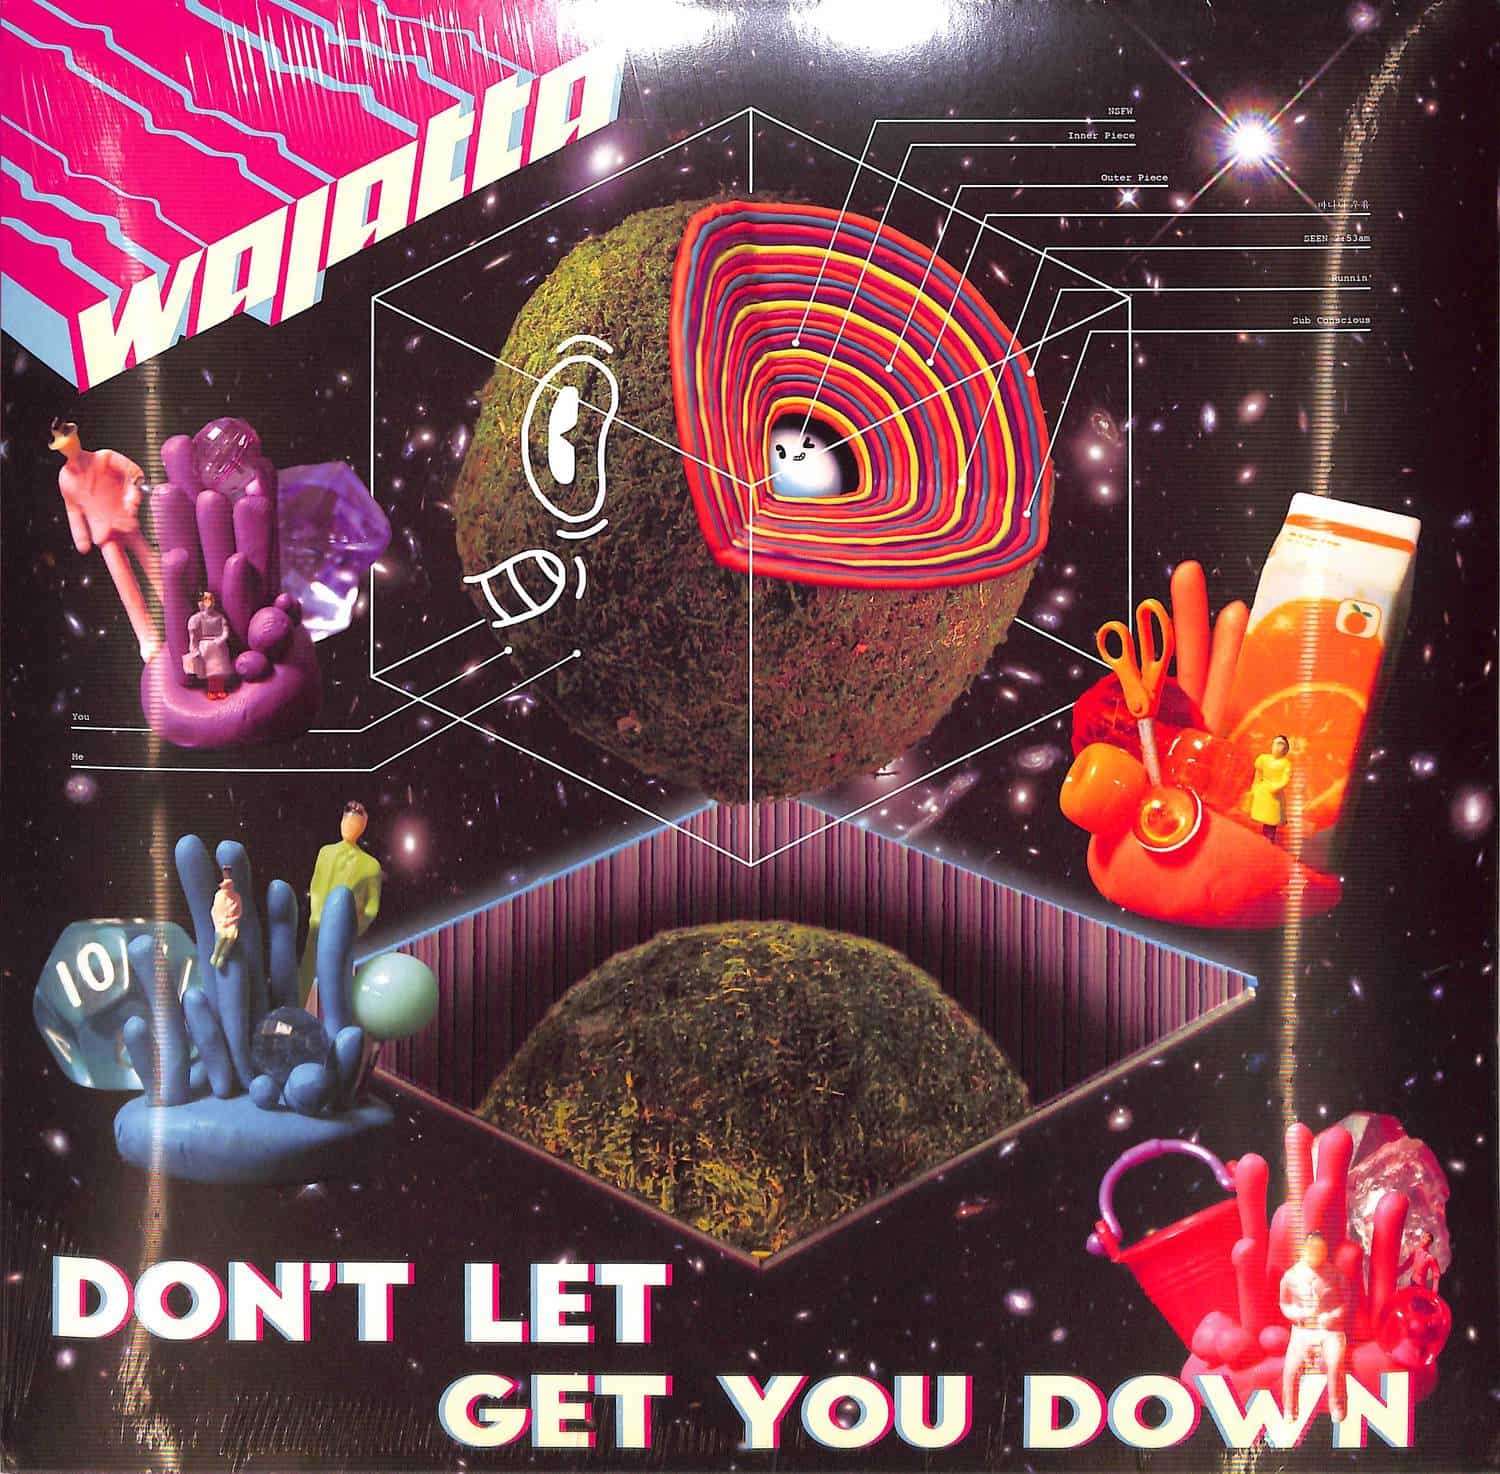 Wajatta - DONT LET GET YOU DOWN 